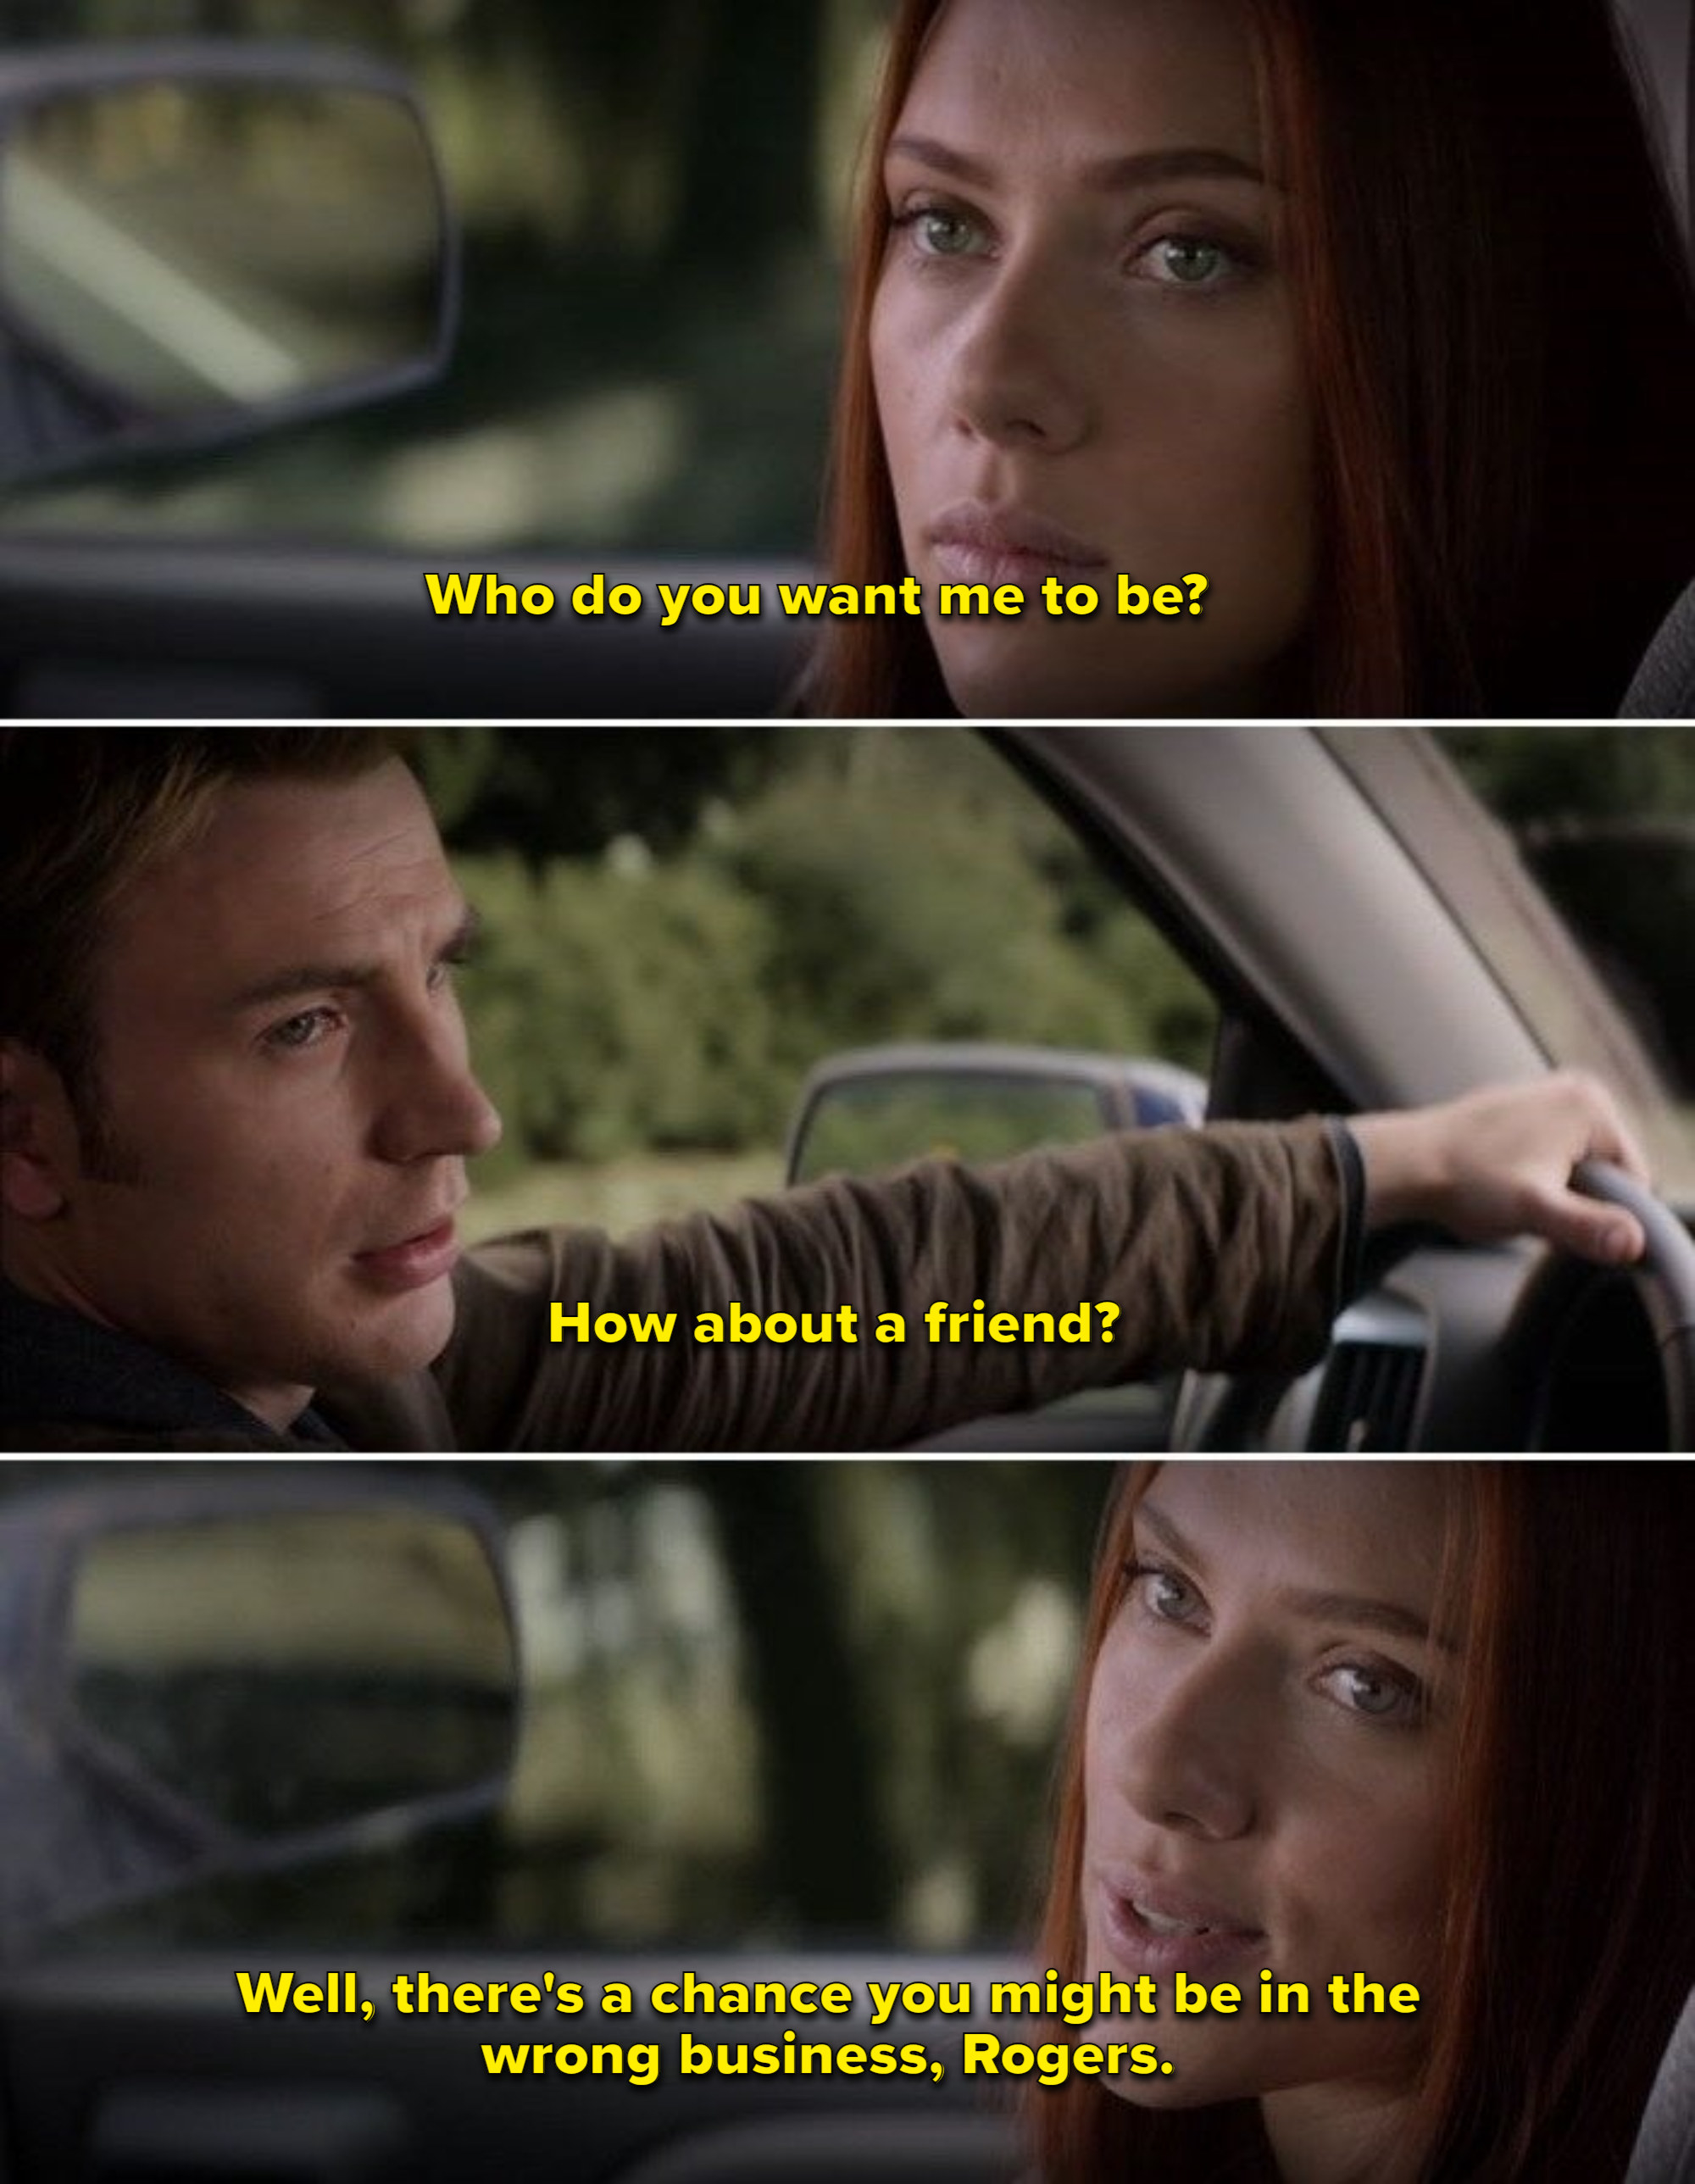 Captain America tells Black Widow that he wants her to be a friend and she tells him that he might be in the wrong business 